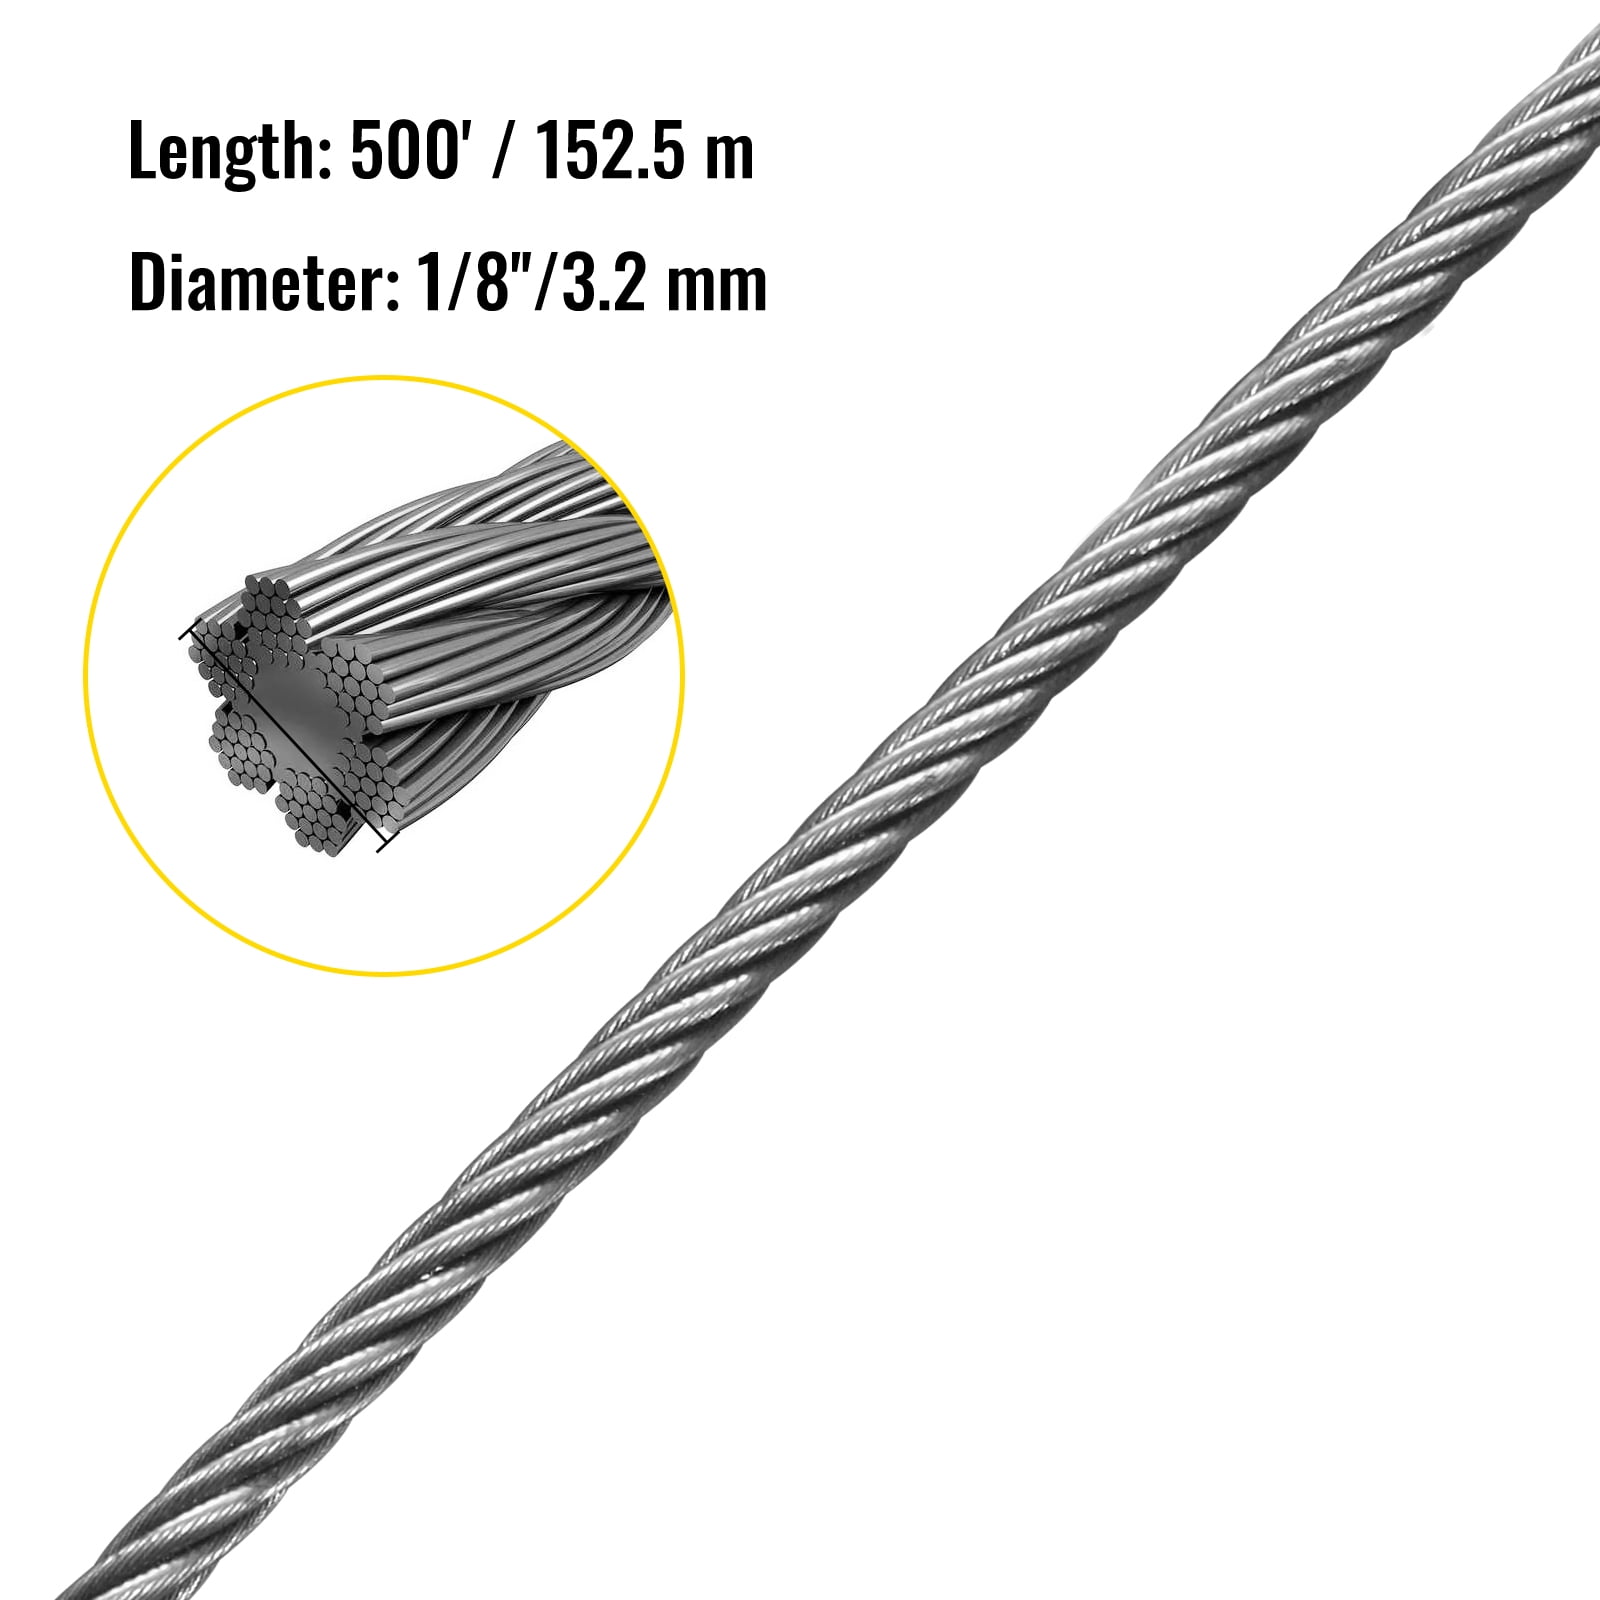 1/8 " 7 x 7 Galvanized Aircraft Cable Wire Rope 500' 